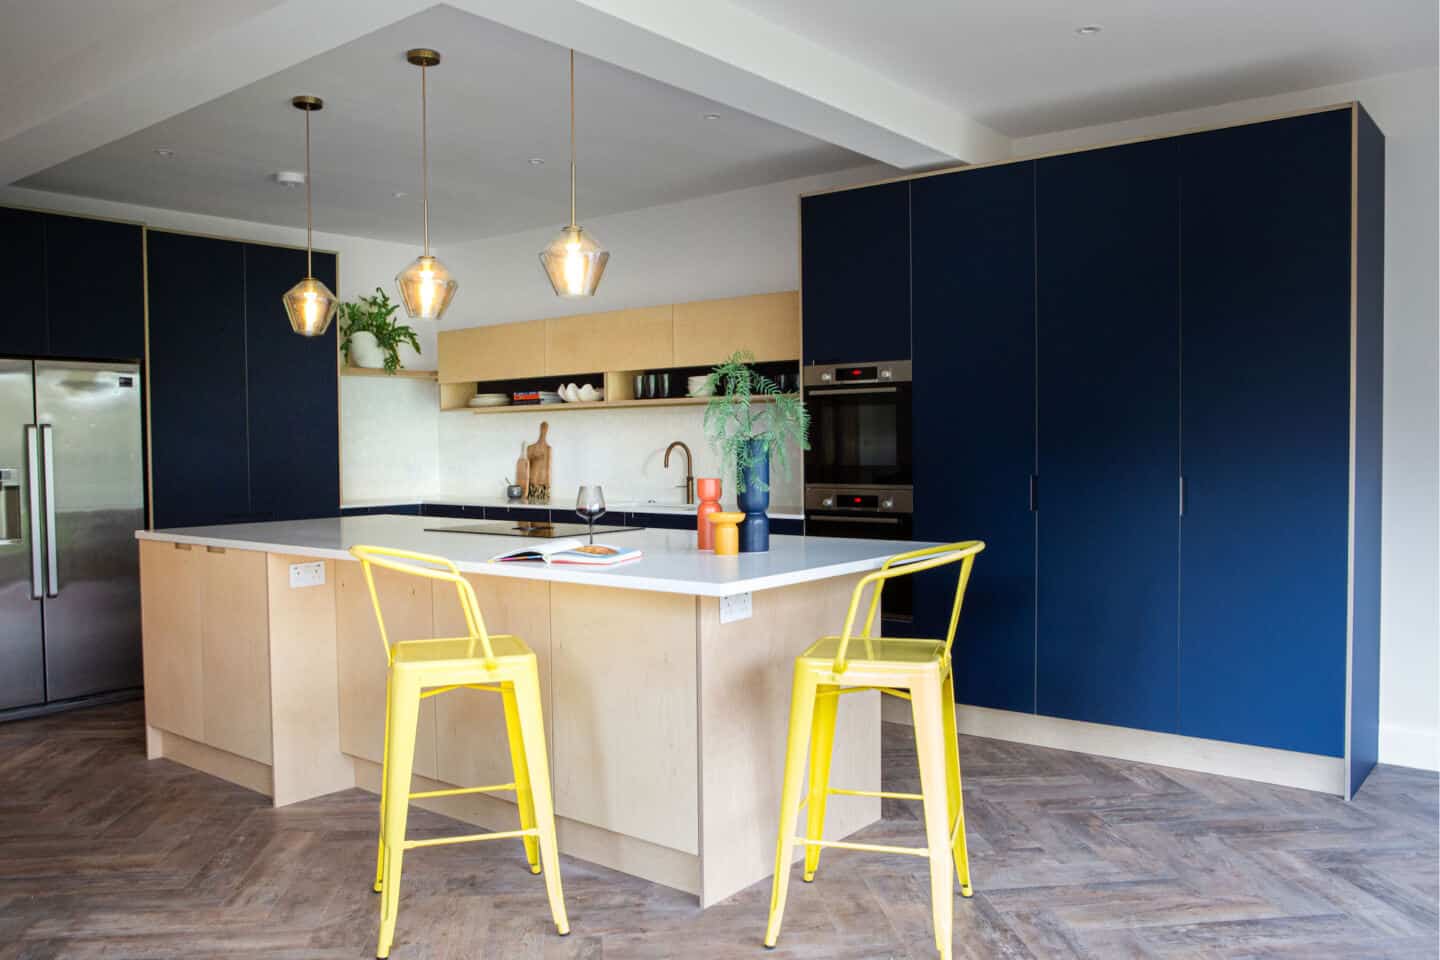 A navy blue kitchen with a plywood kitchen island and yellow bar stools